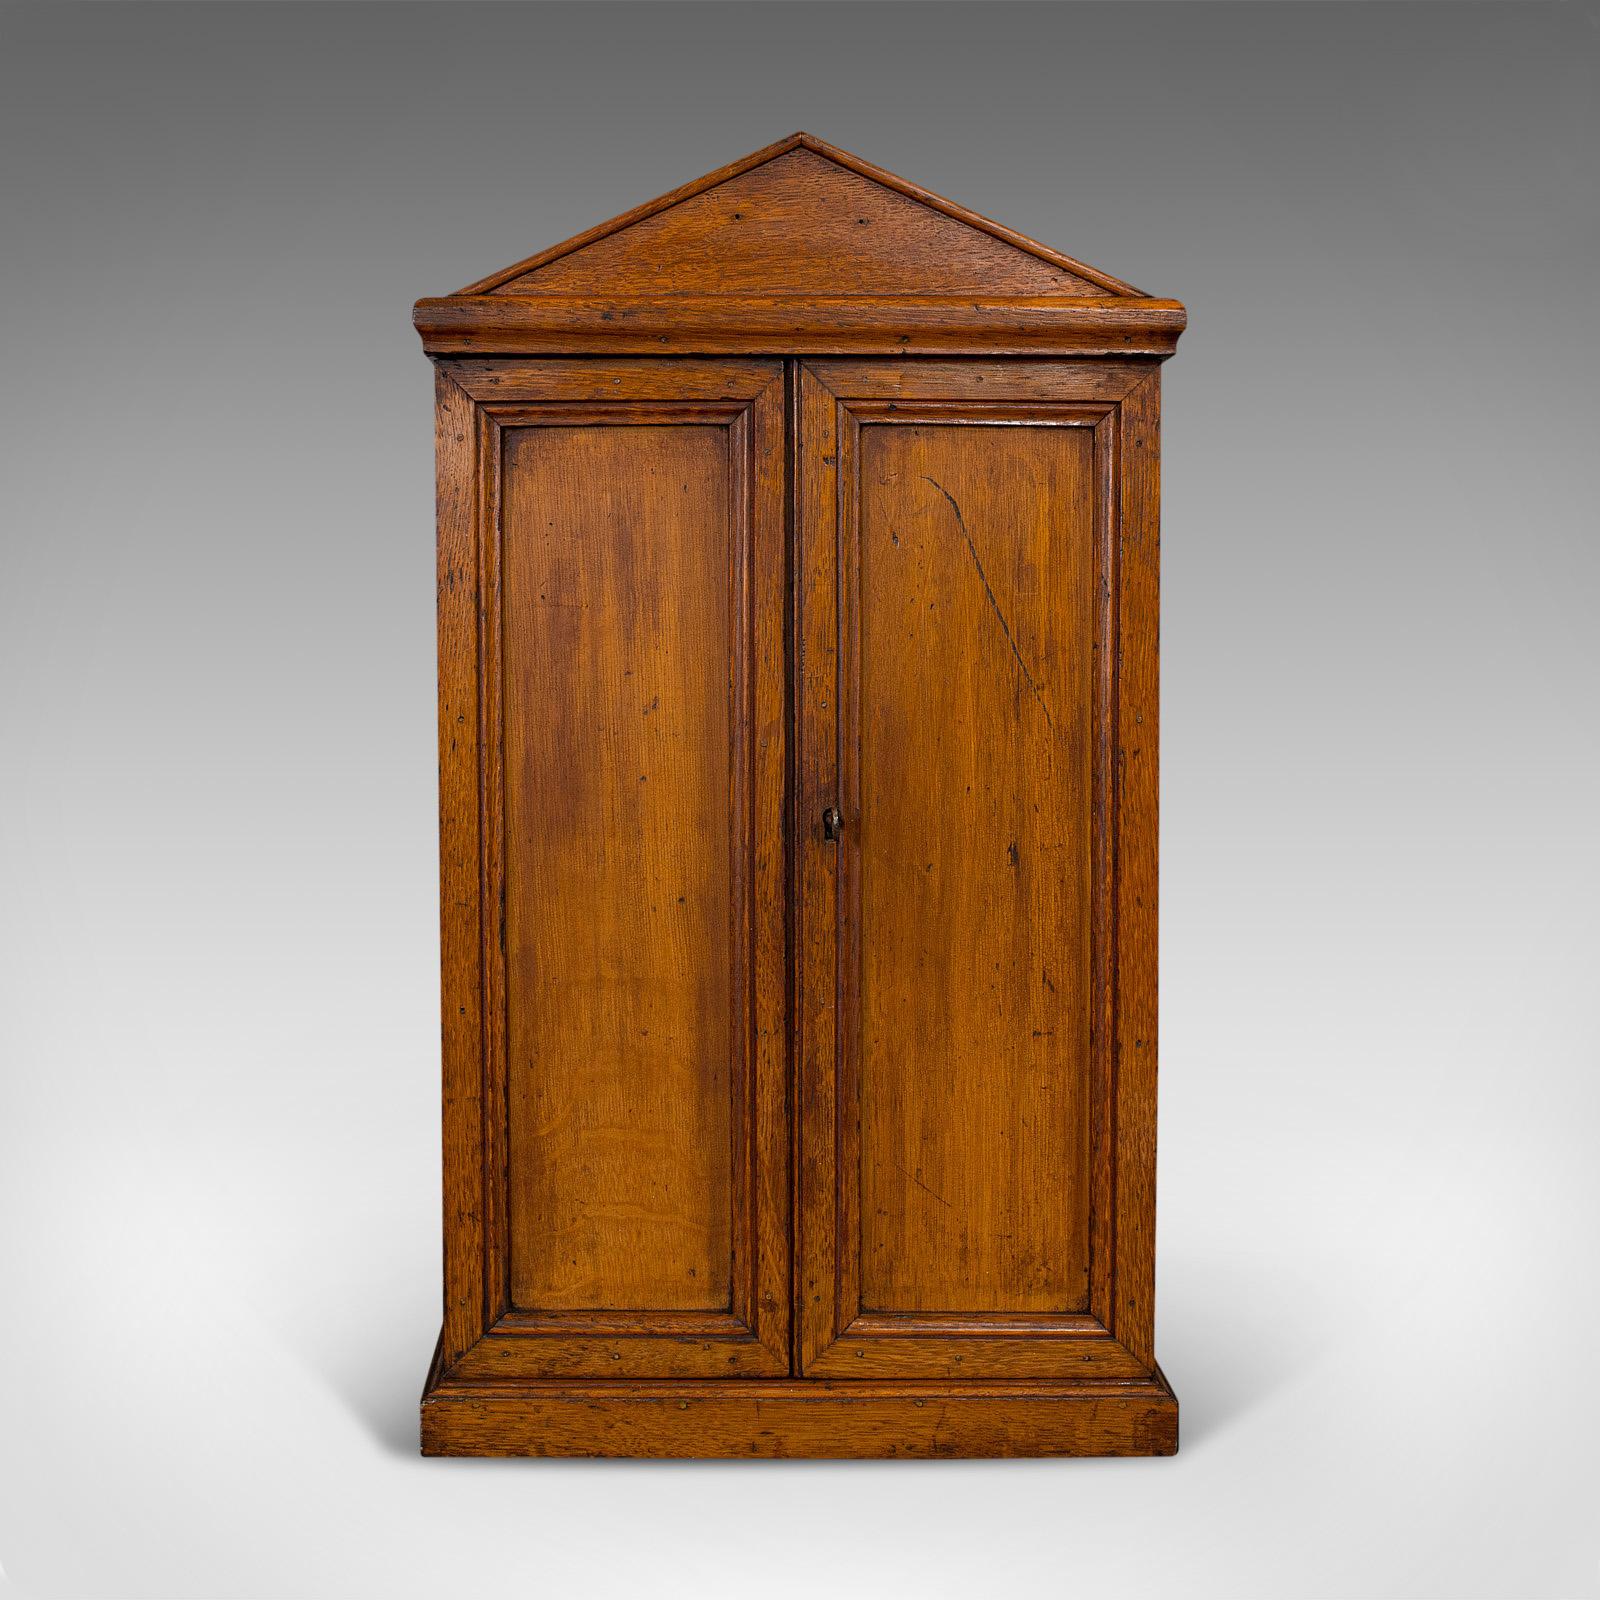 This is an antique tool cupboard. An English, oak wall hanging cabinet by the Army and Navy Co-operative, dating to the Edwardian period, circa 1910.

Fascinating tool cabinet with elegant craftsmanship
Displays a desirable aged patina
Select